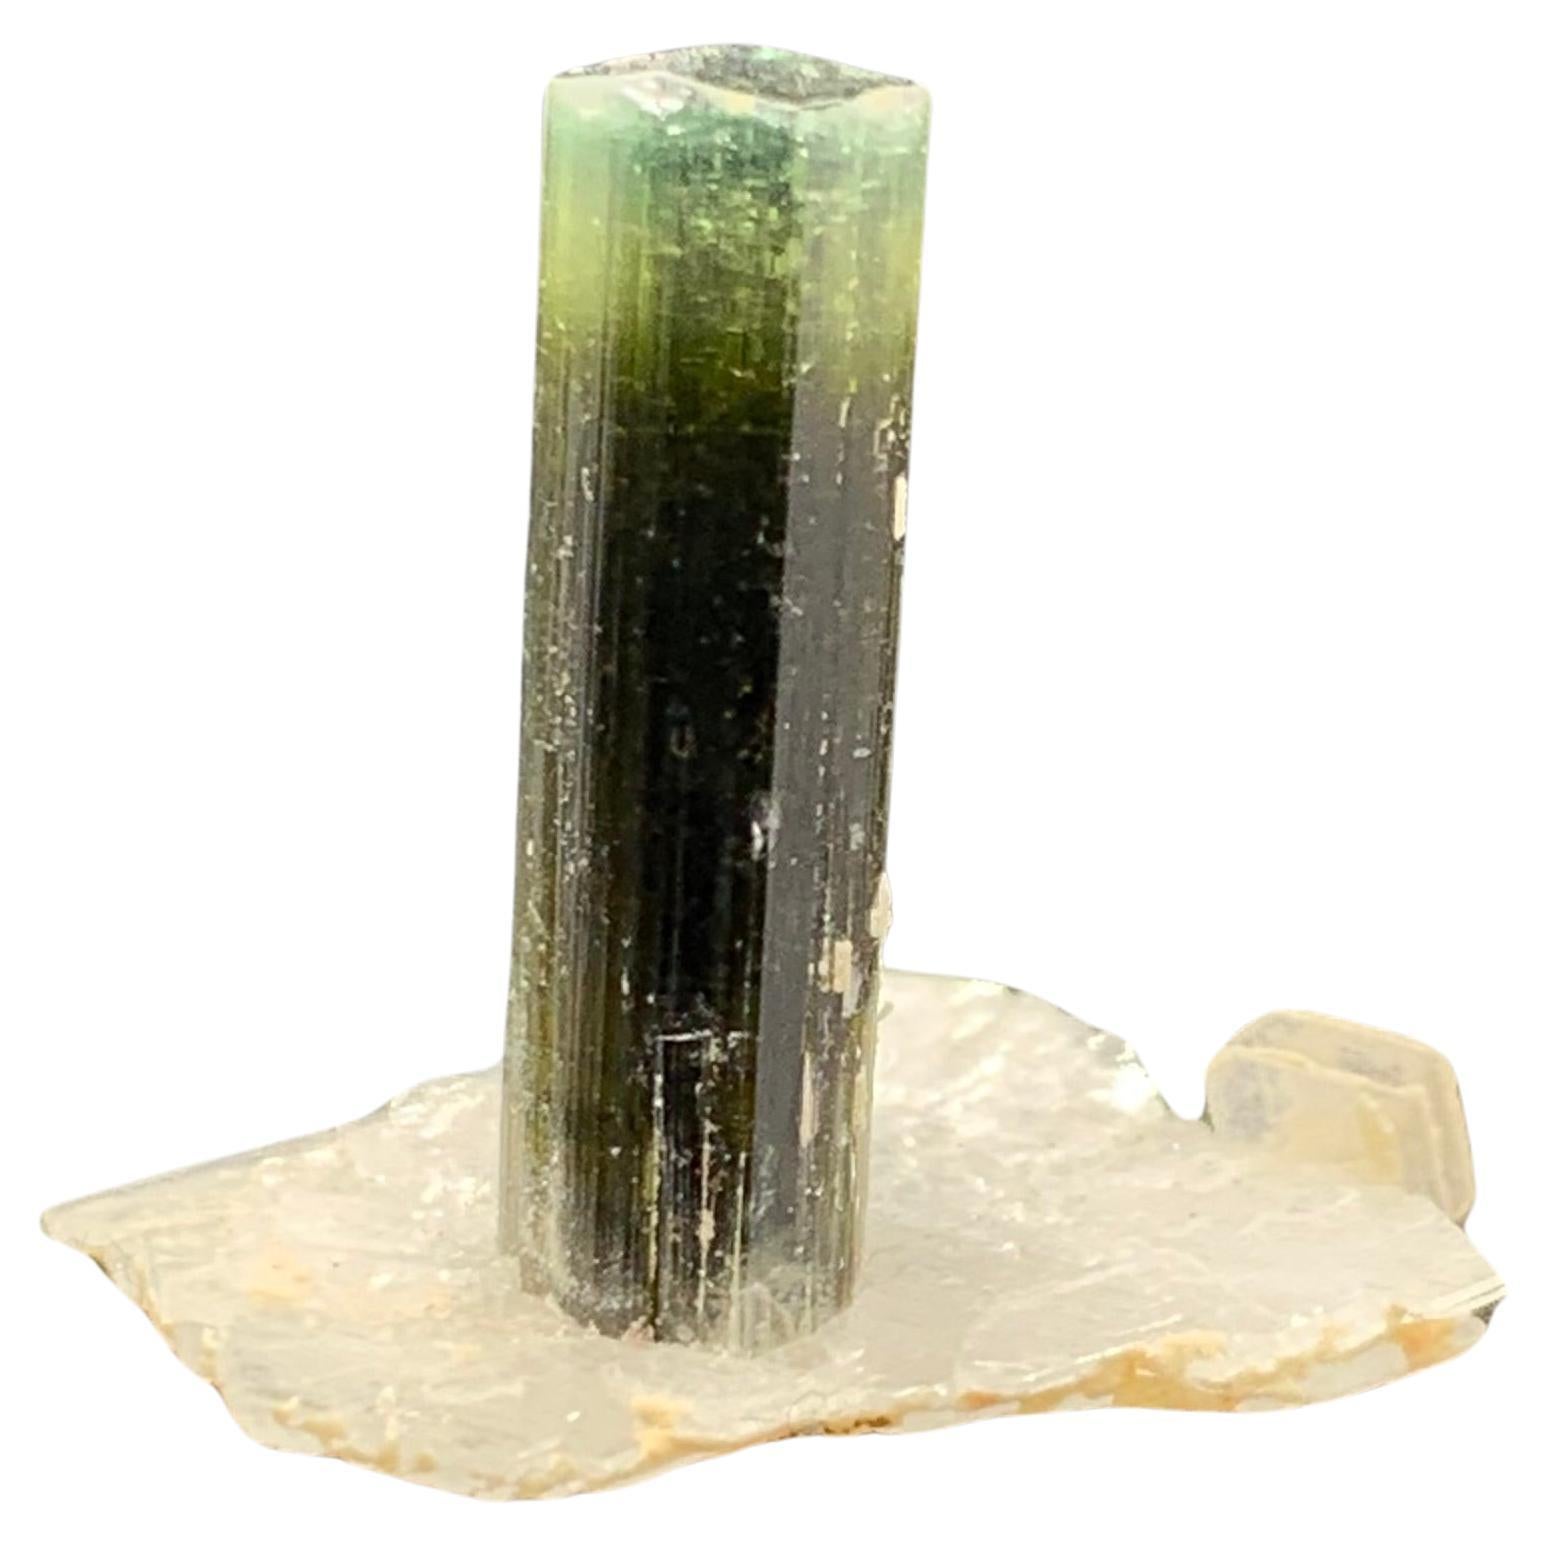 2.56 Gram Elegant Tourmaline Crystal Attached With Albite From Pakistan 